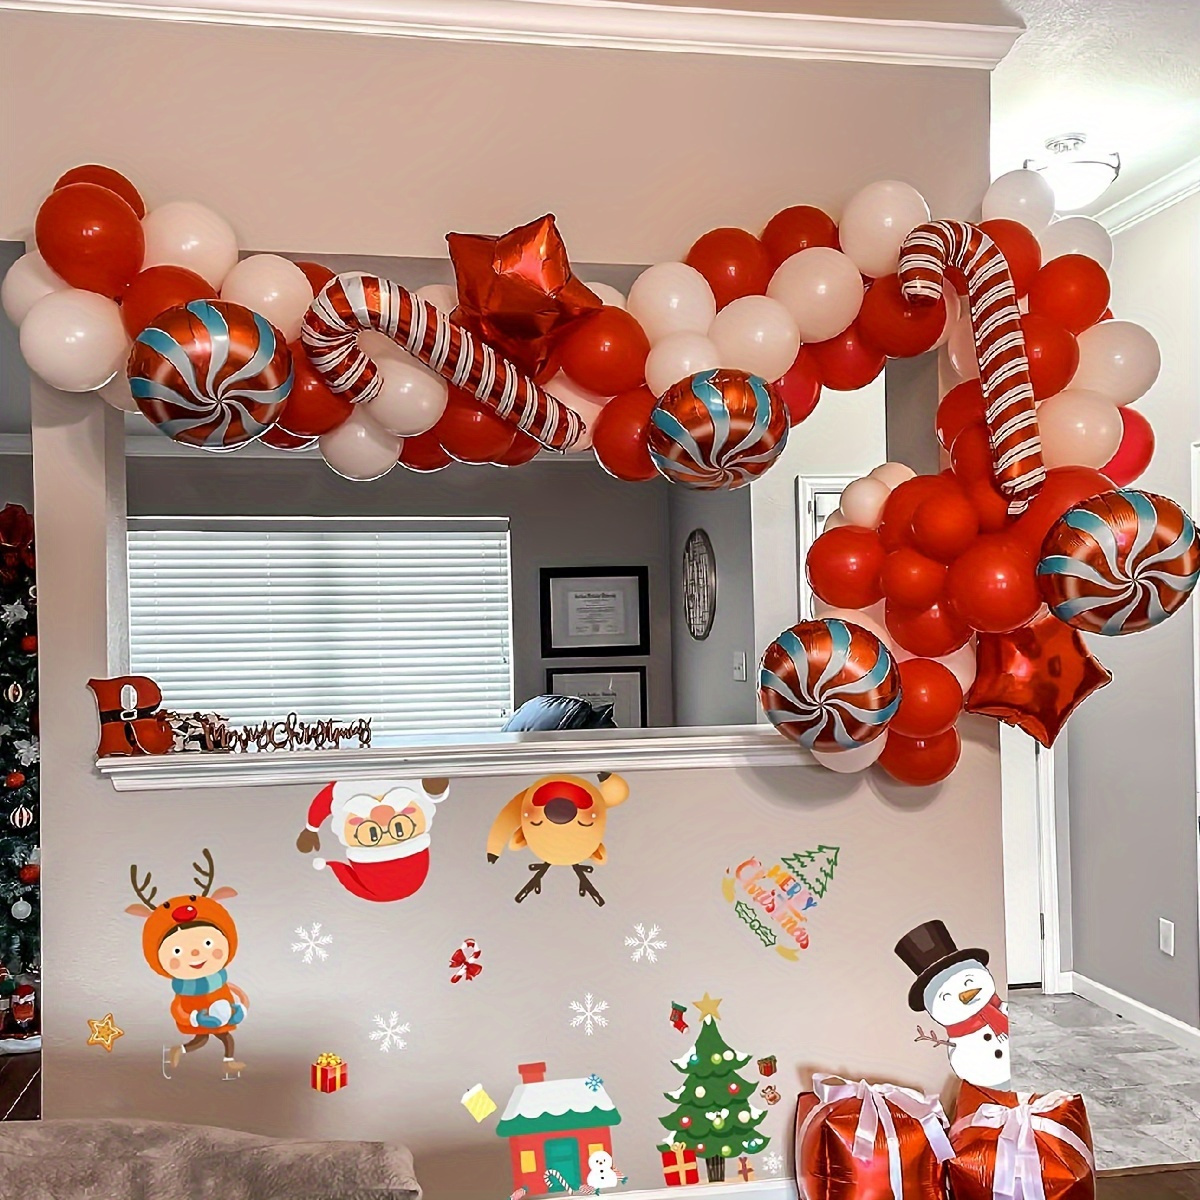 Party Decoration Ideas with Balloons - Office Furniture